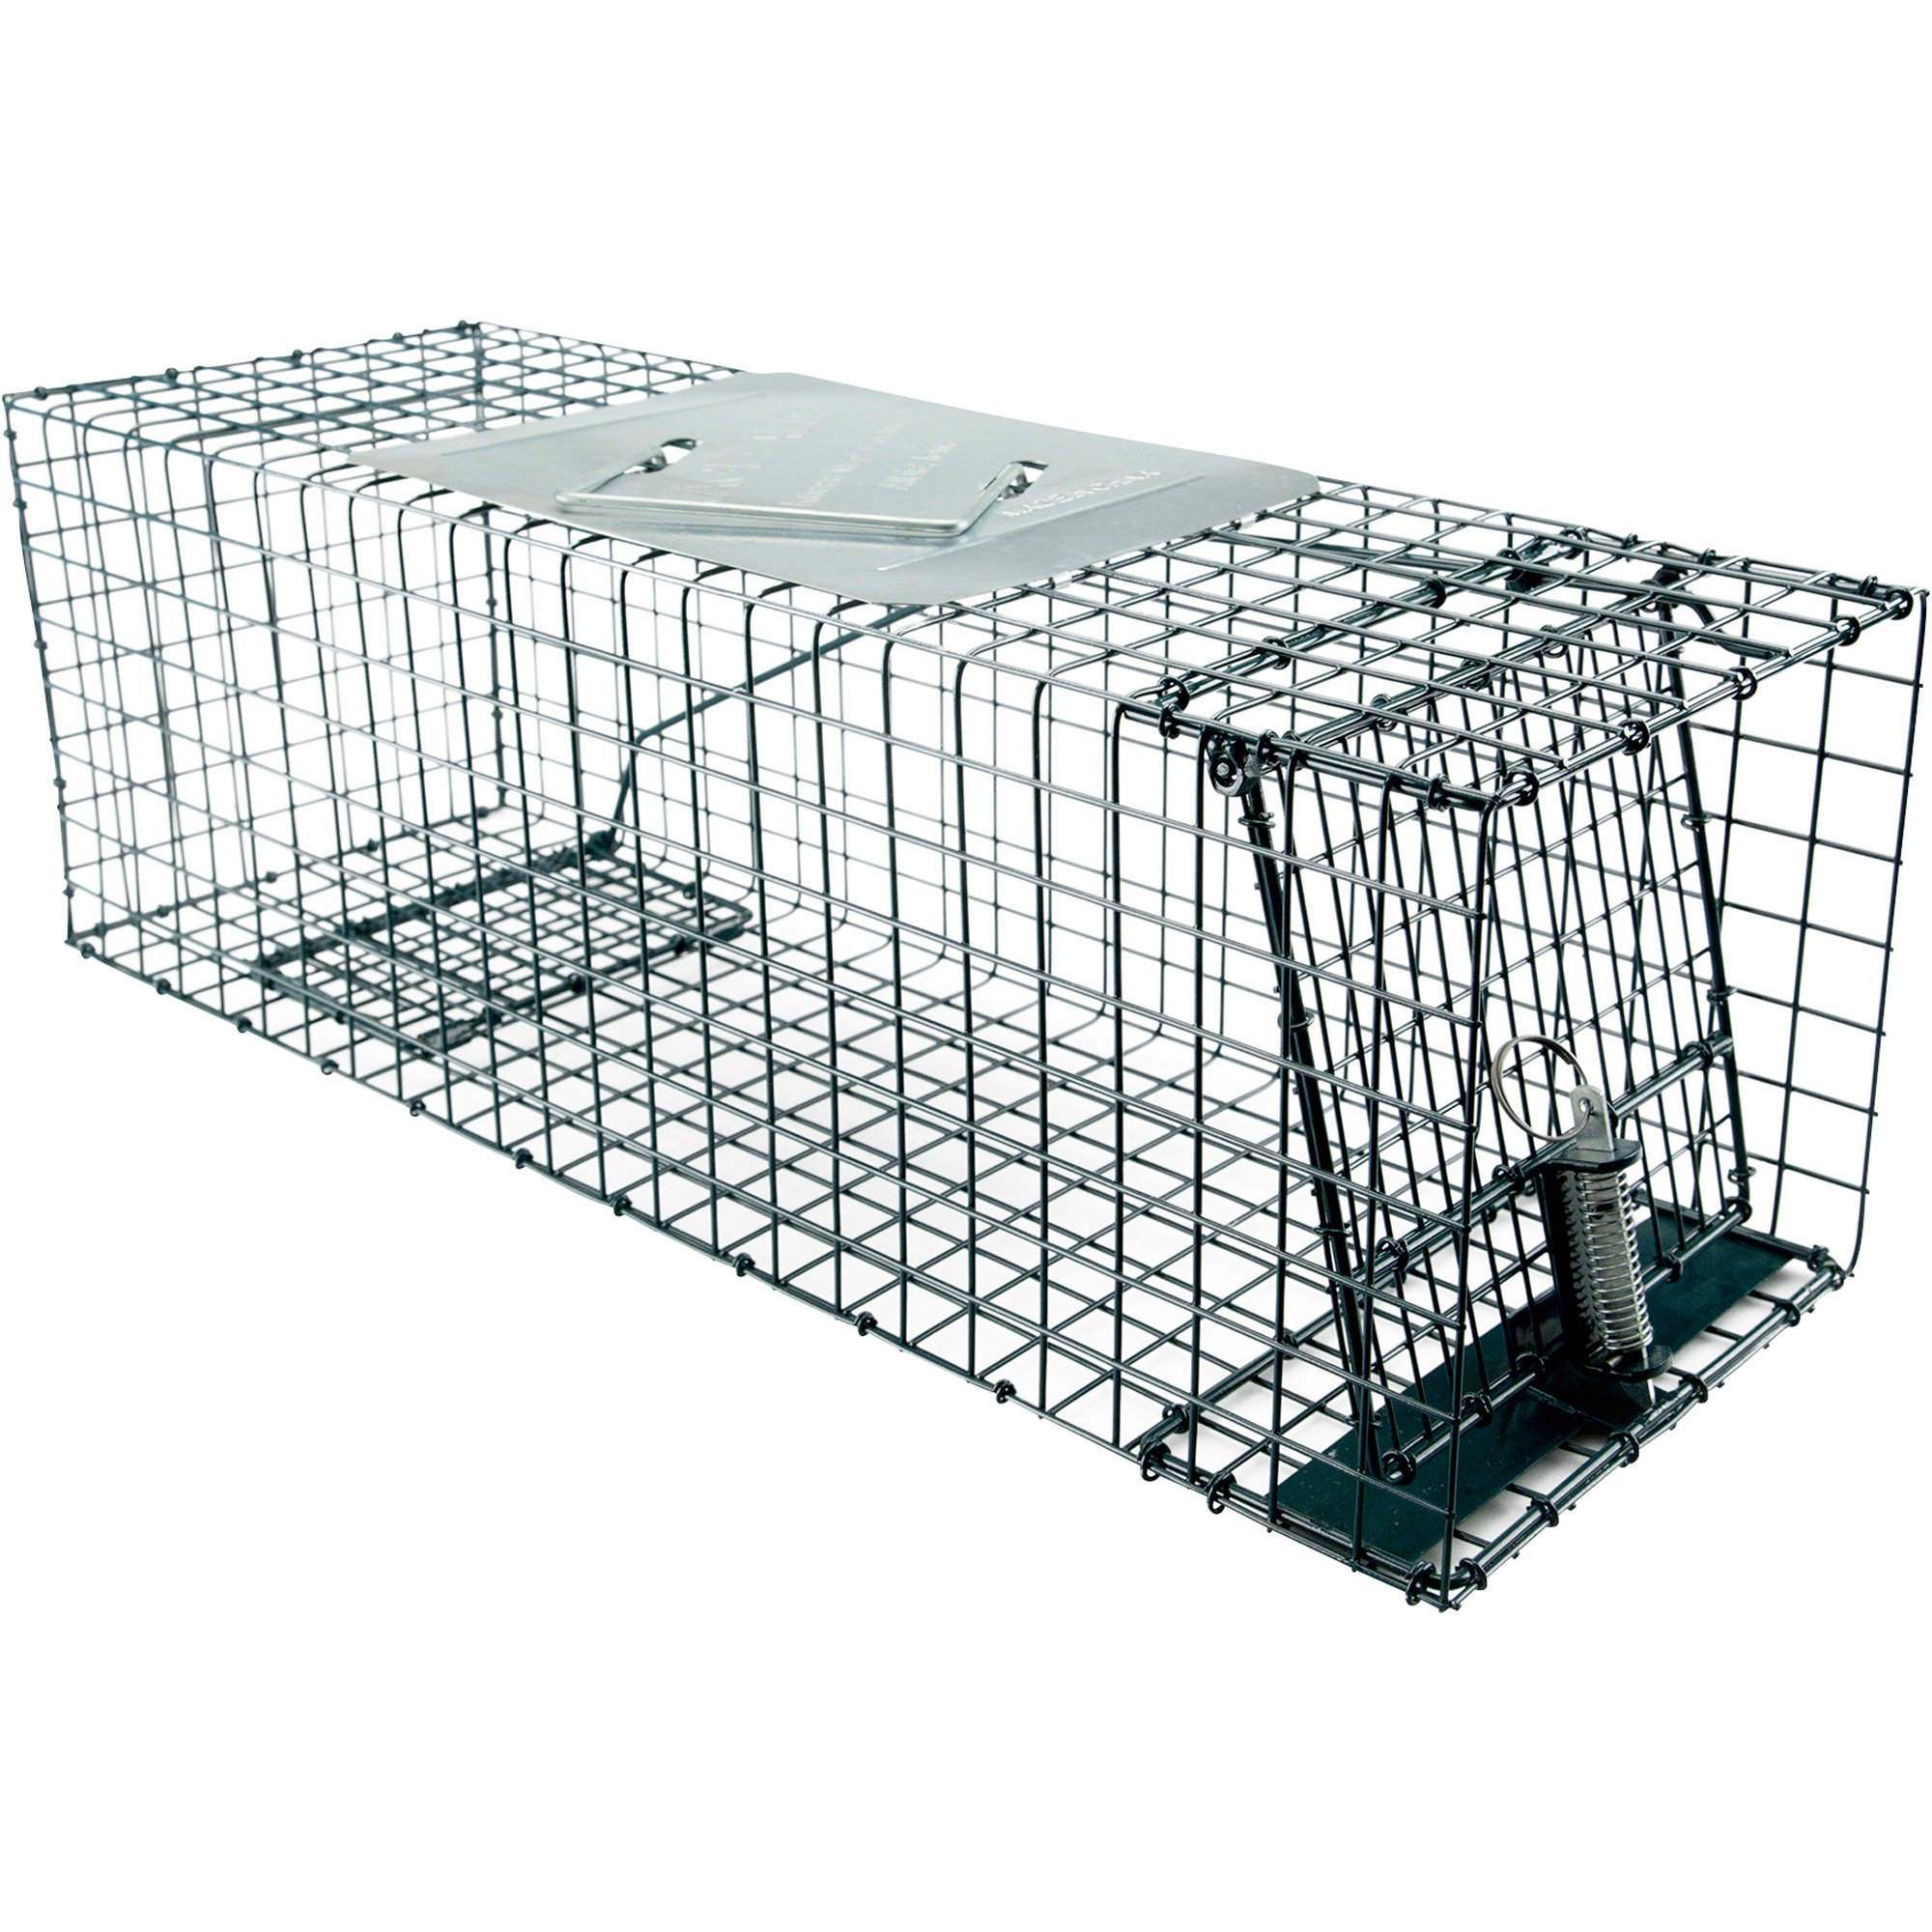 Grip 2-Trap Value Pack of Catch and Release Live Animal Traps - 1 Large and 1 Small Model 54234